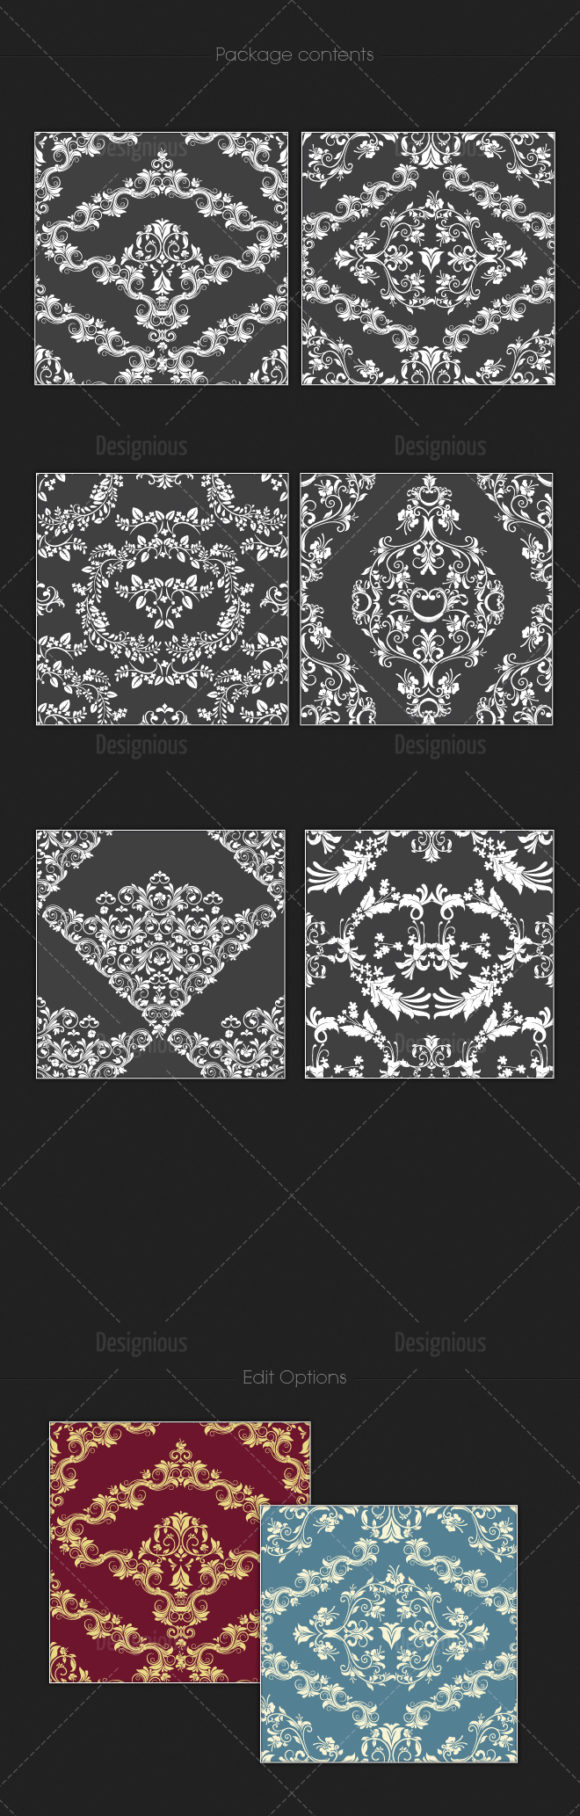 Seamless Patterns Vector Pack 111 2